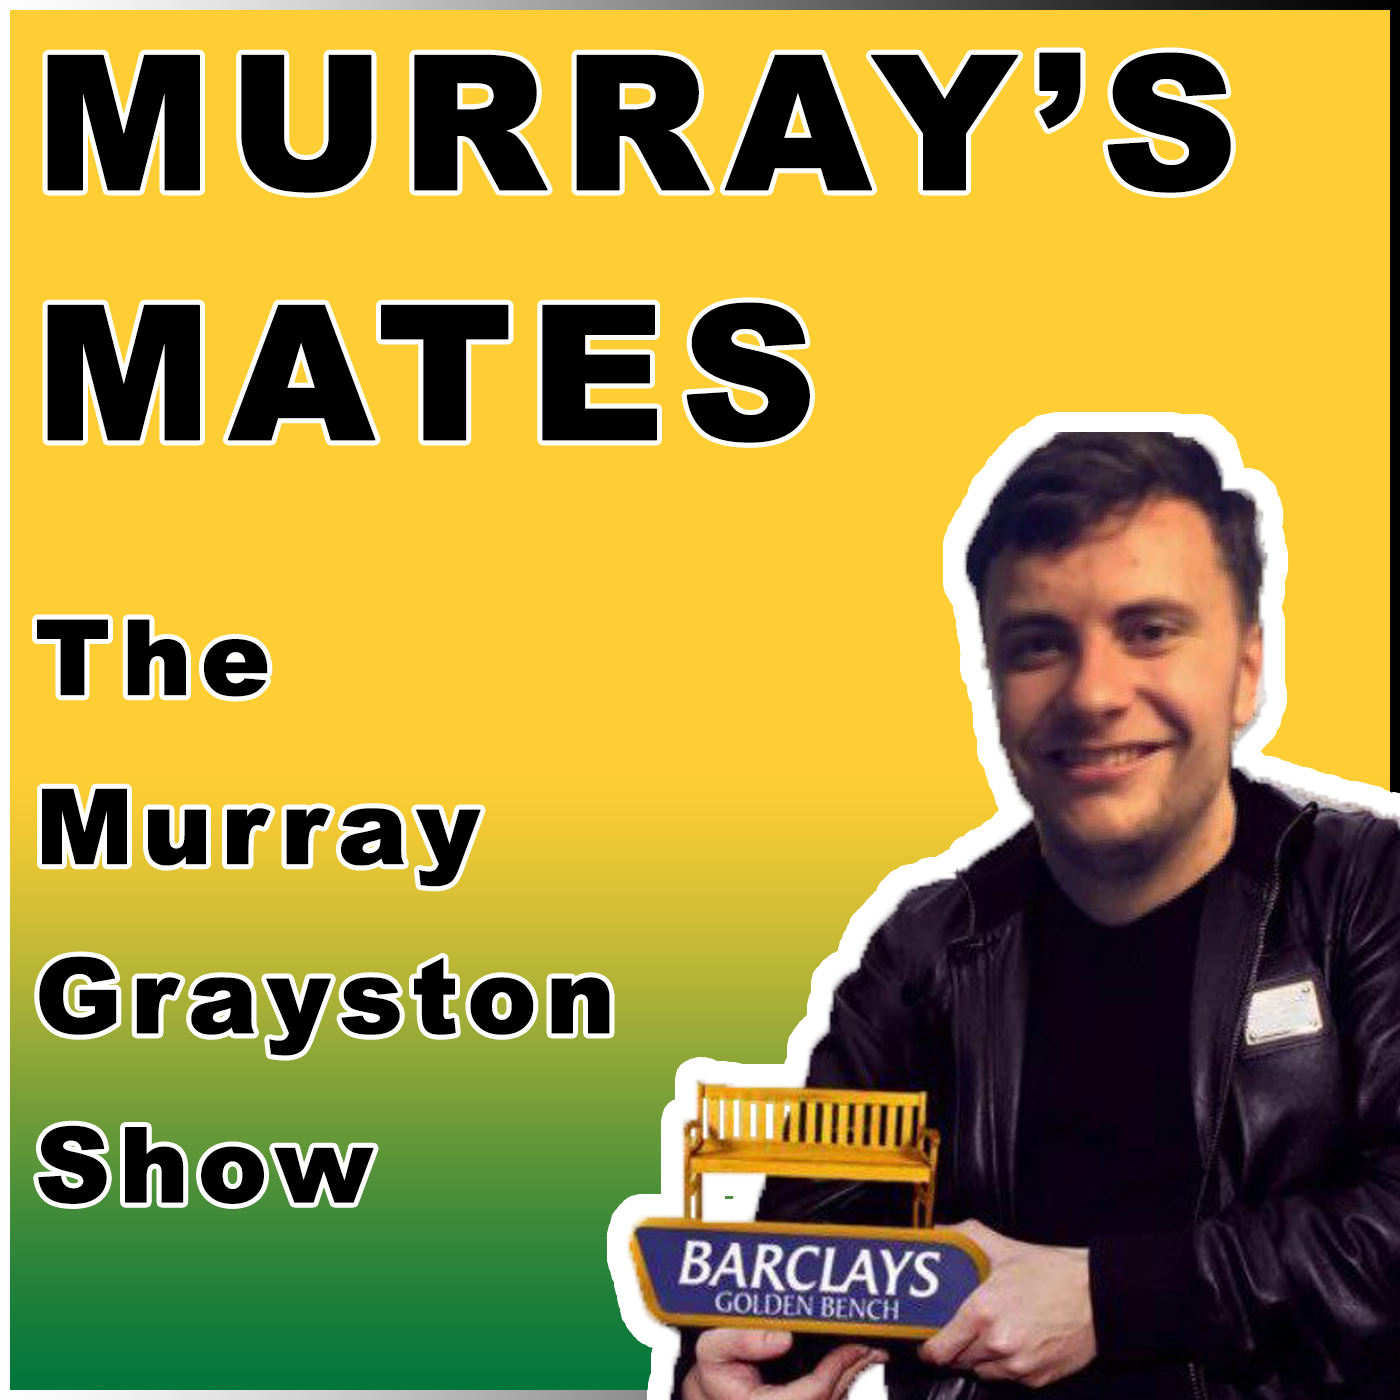 Murray's Mates - The Largs Thistle show